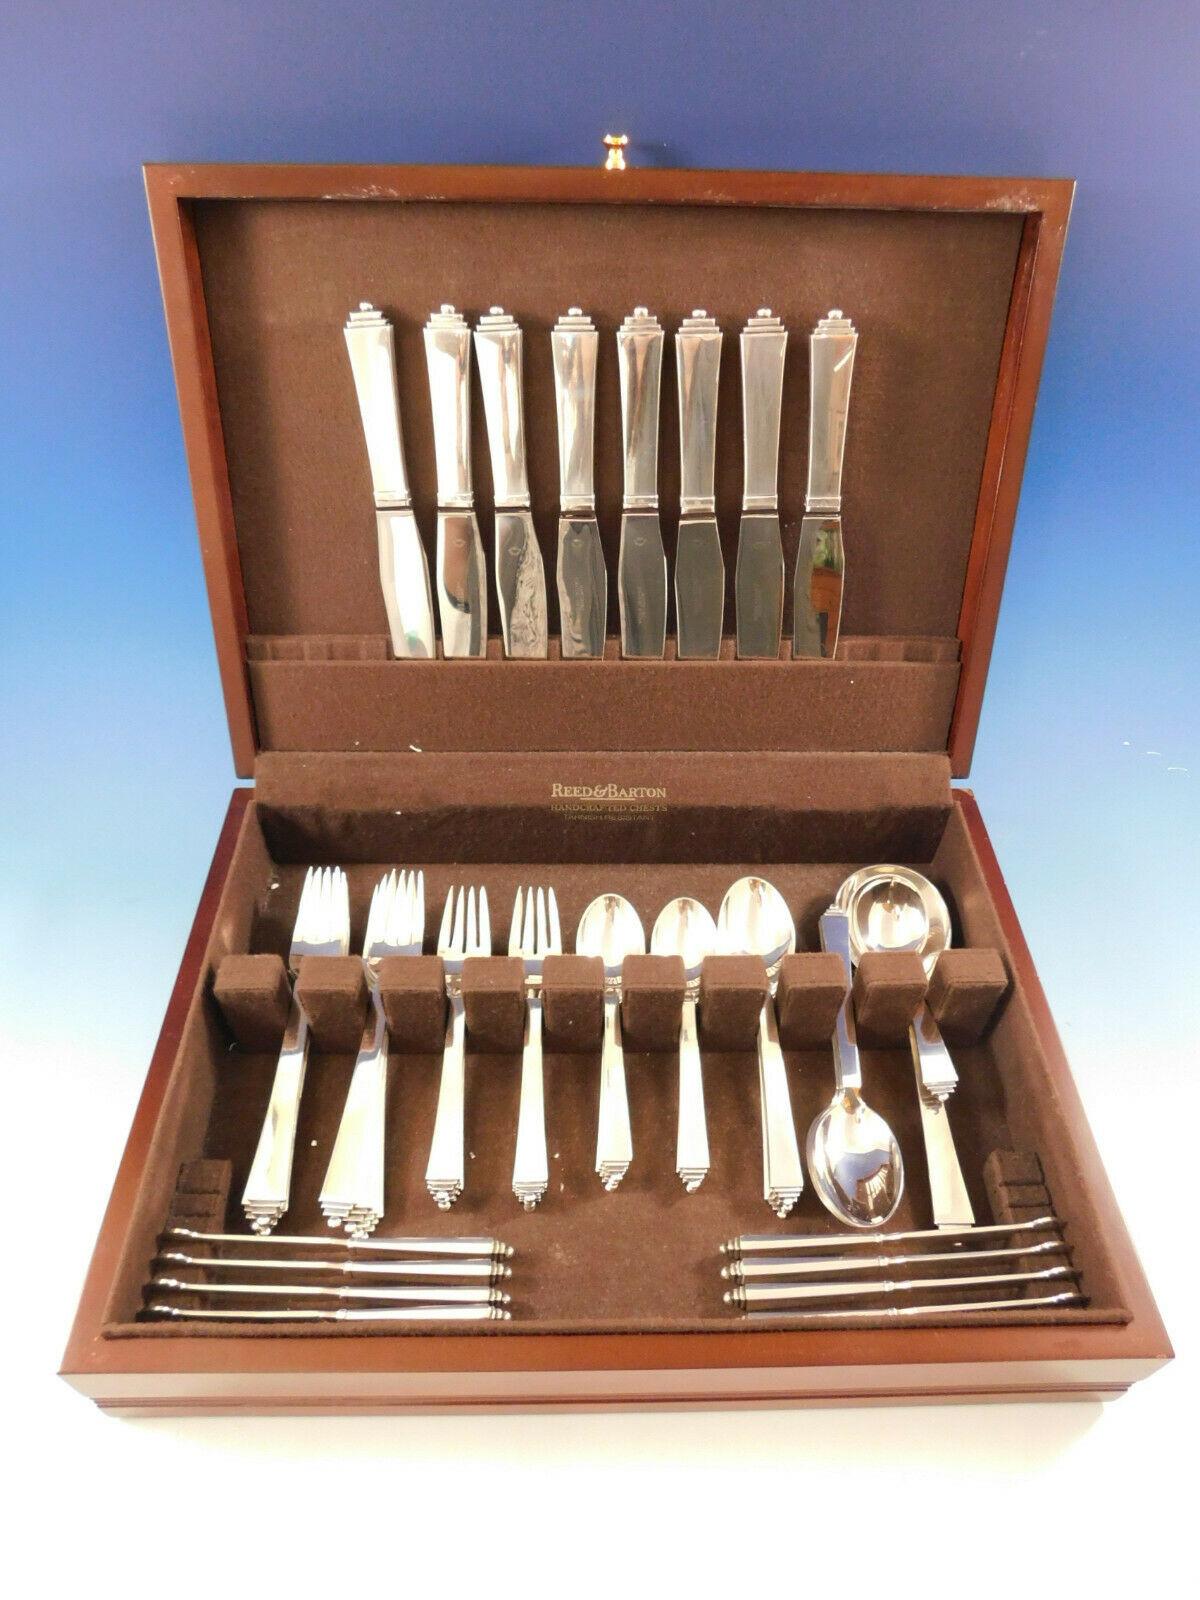 Stunning Pyramid by Georg Jensen Danish sterling silver flatware set - 50 pieces. This set includes:

8 dinner knives, 8 7/8